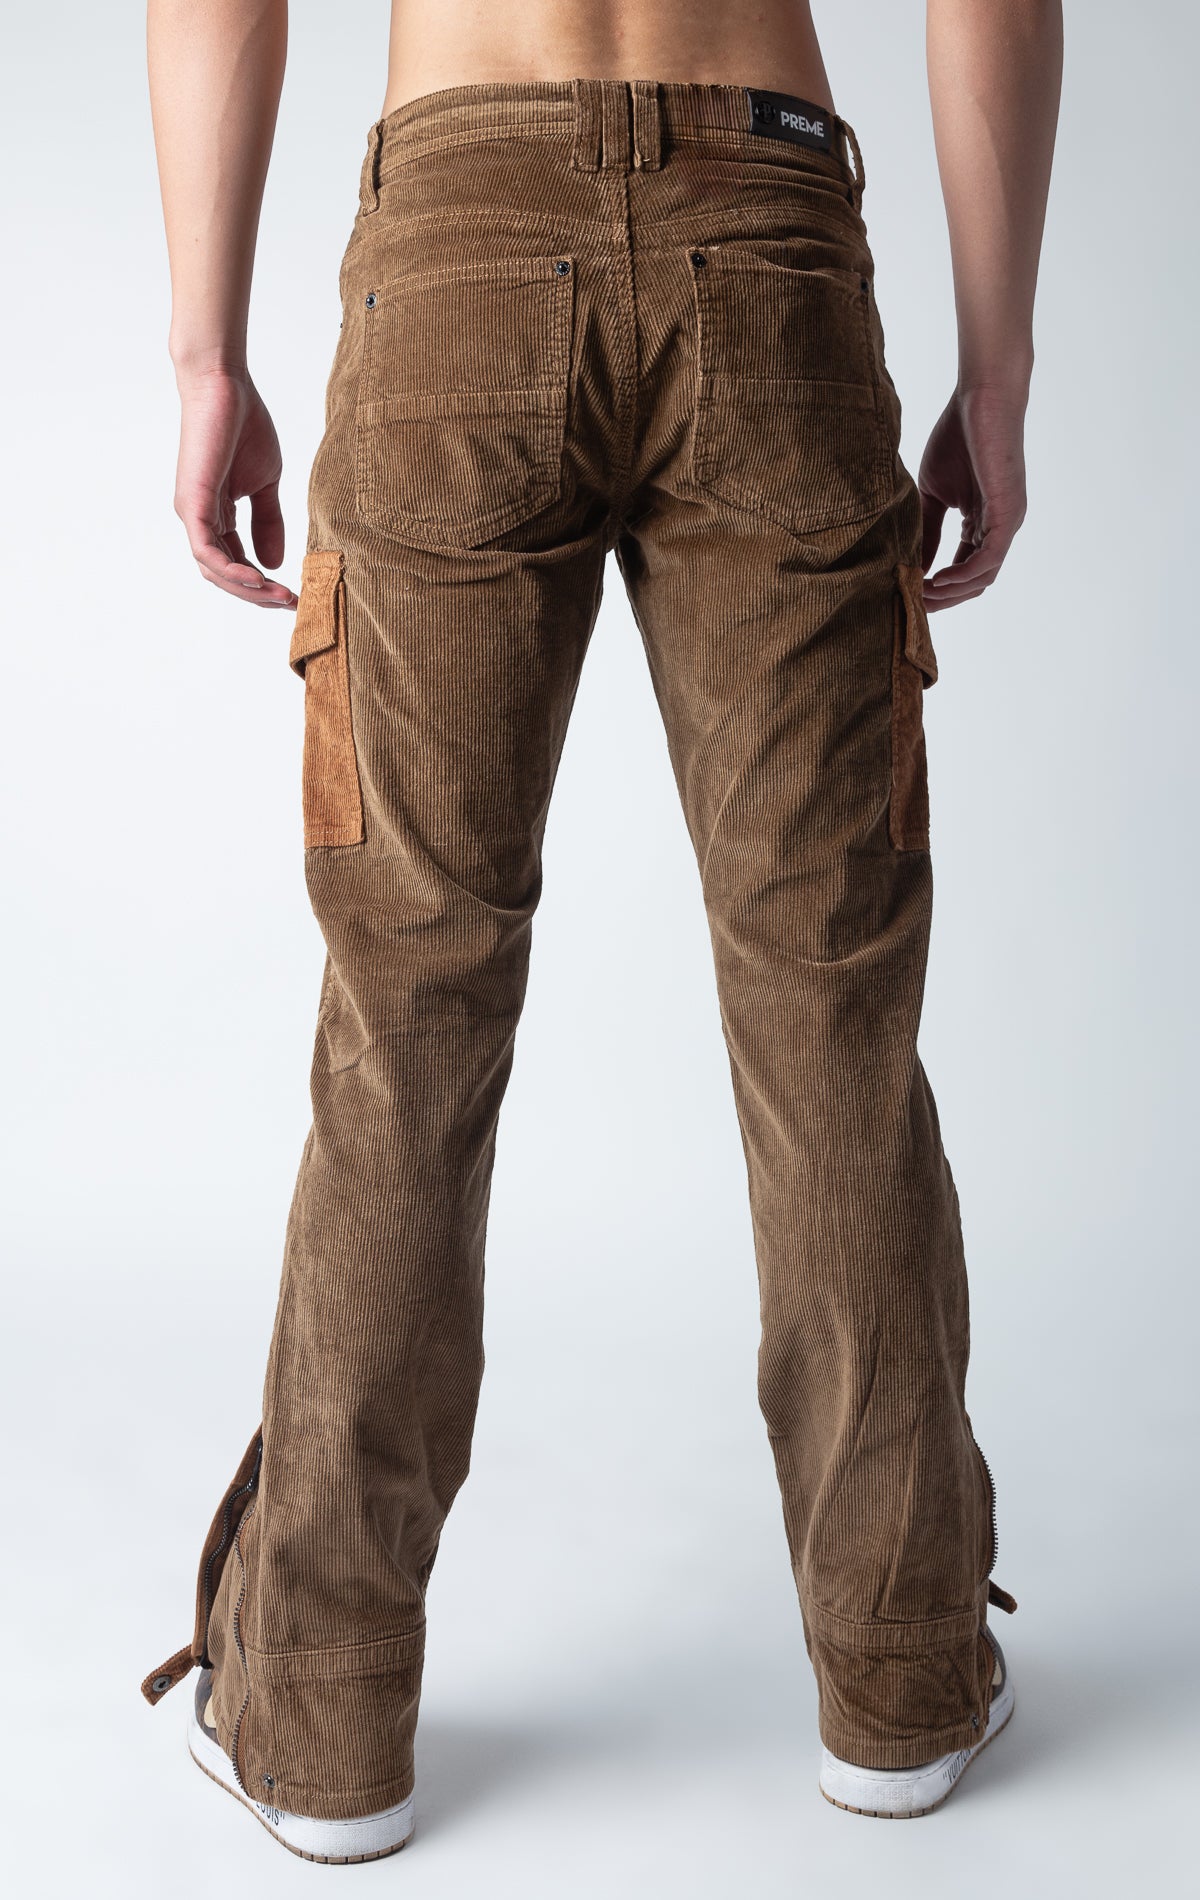 Mocha corduroy jeans&nbsp;with semi-stacked flares and sumptuous corduroy accents